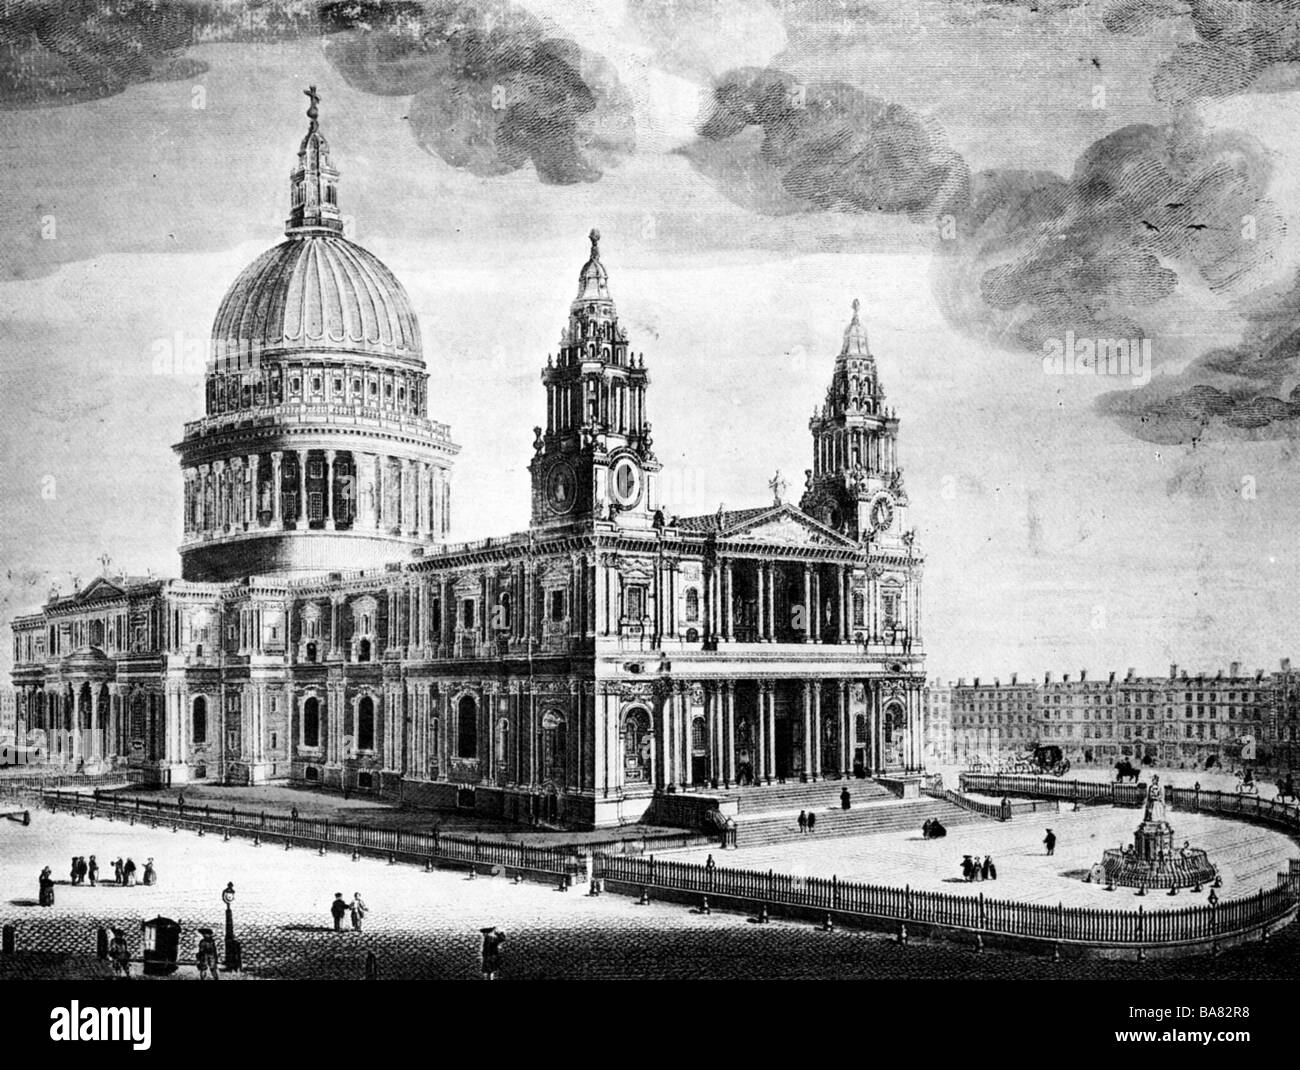 ST PAULS CATHEDRAL, London in an 18th century engraving Stock Photo